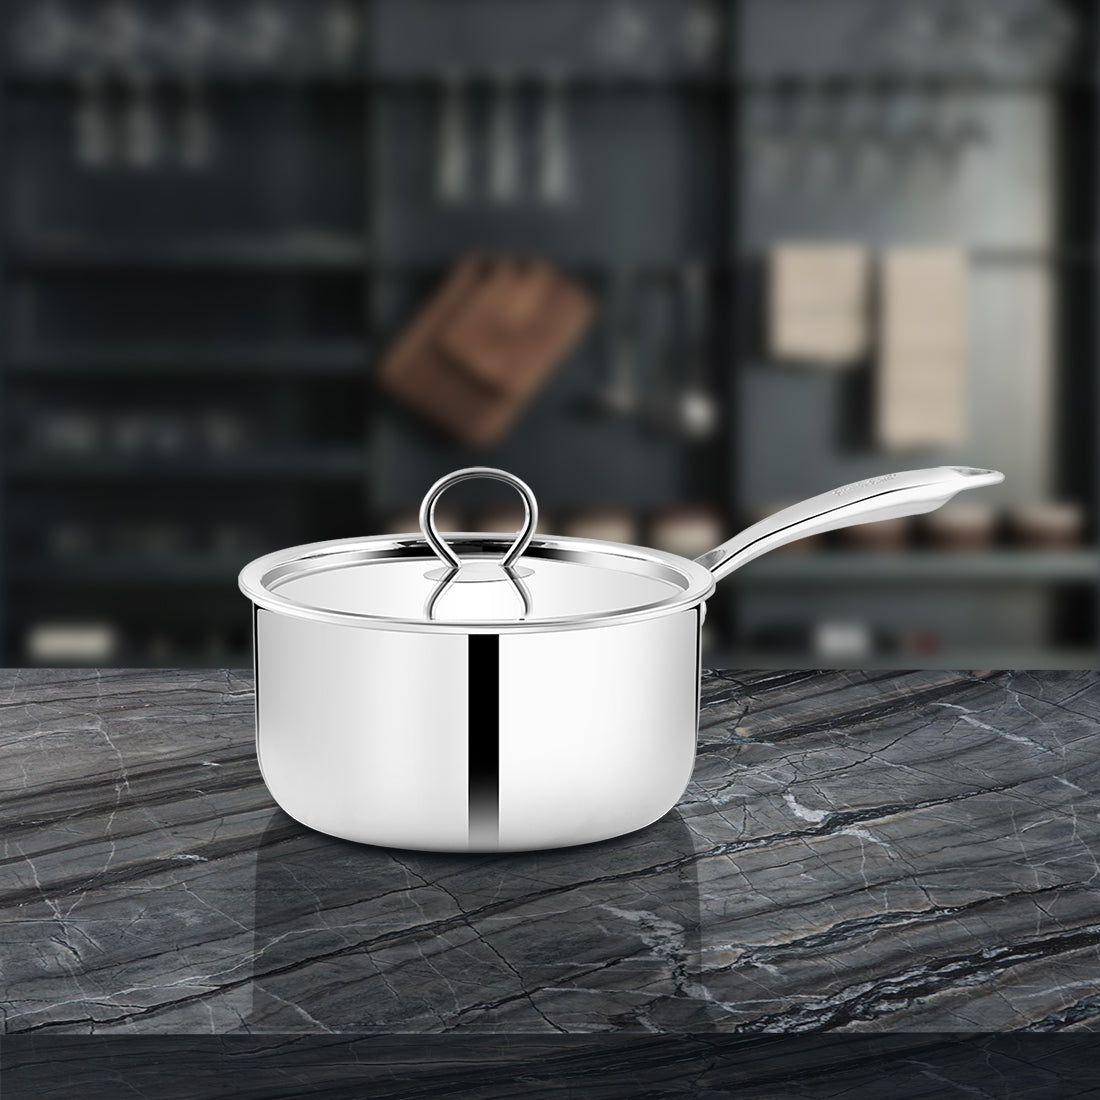 Are heavy, thick metal pots and pans better for cooking than light, thin metal ones?